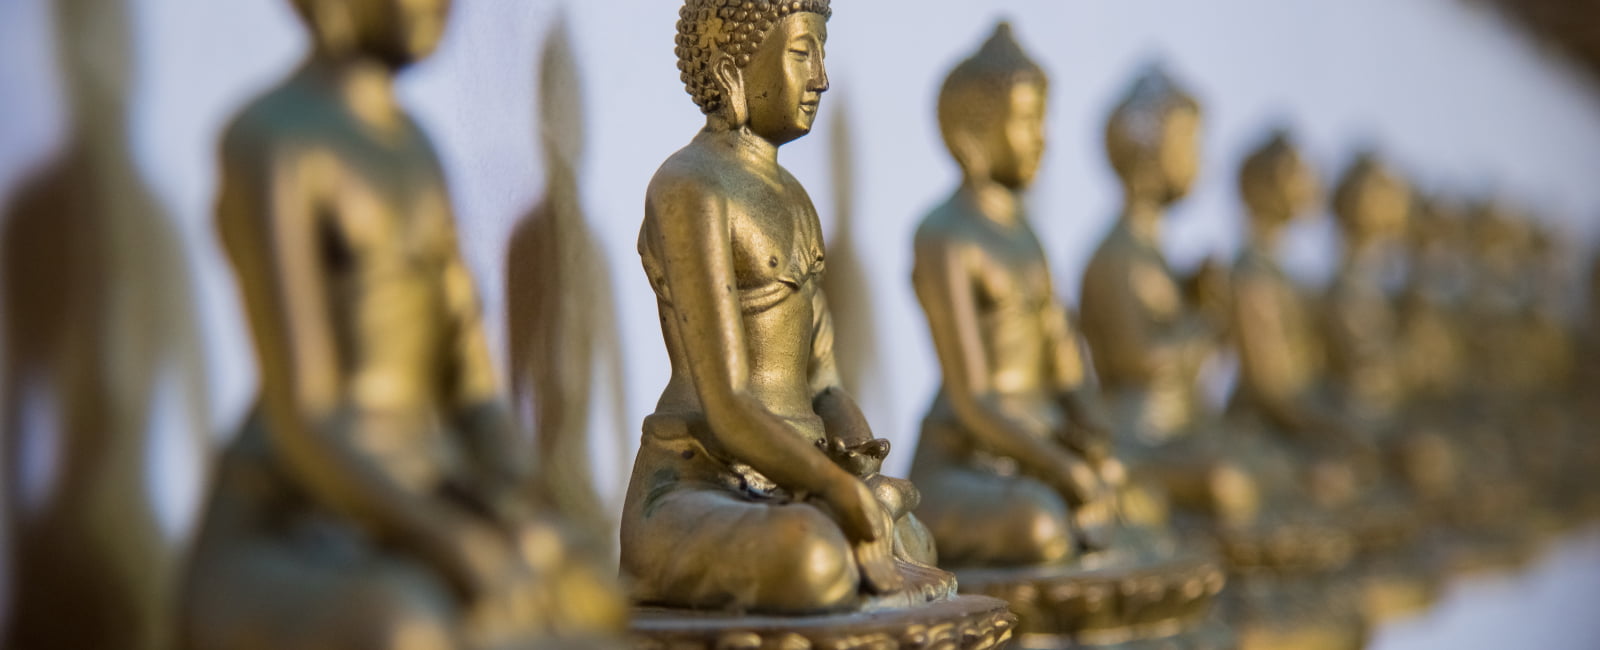 Asian religious sculptures in a row